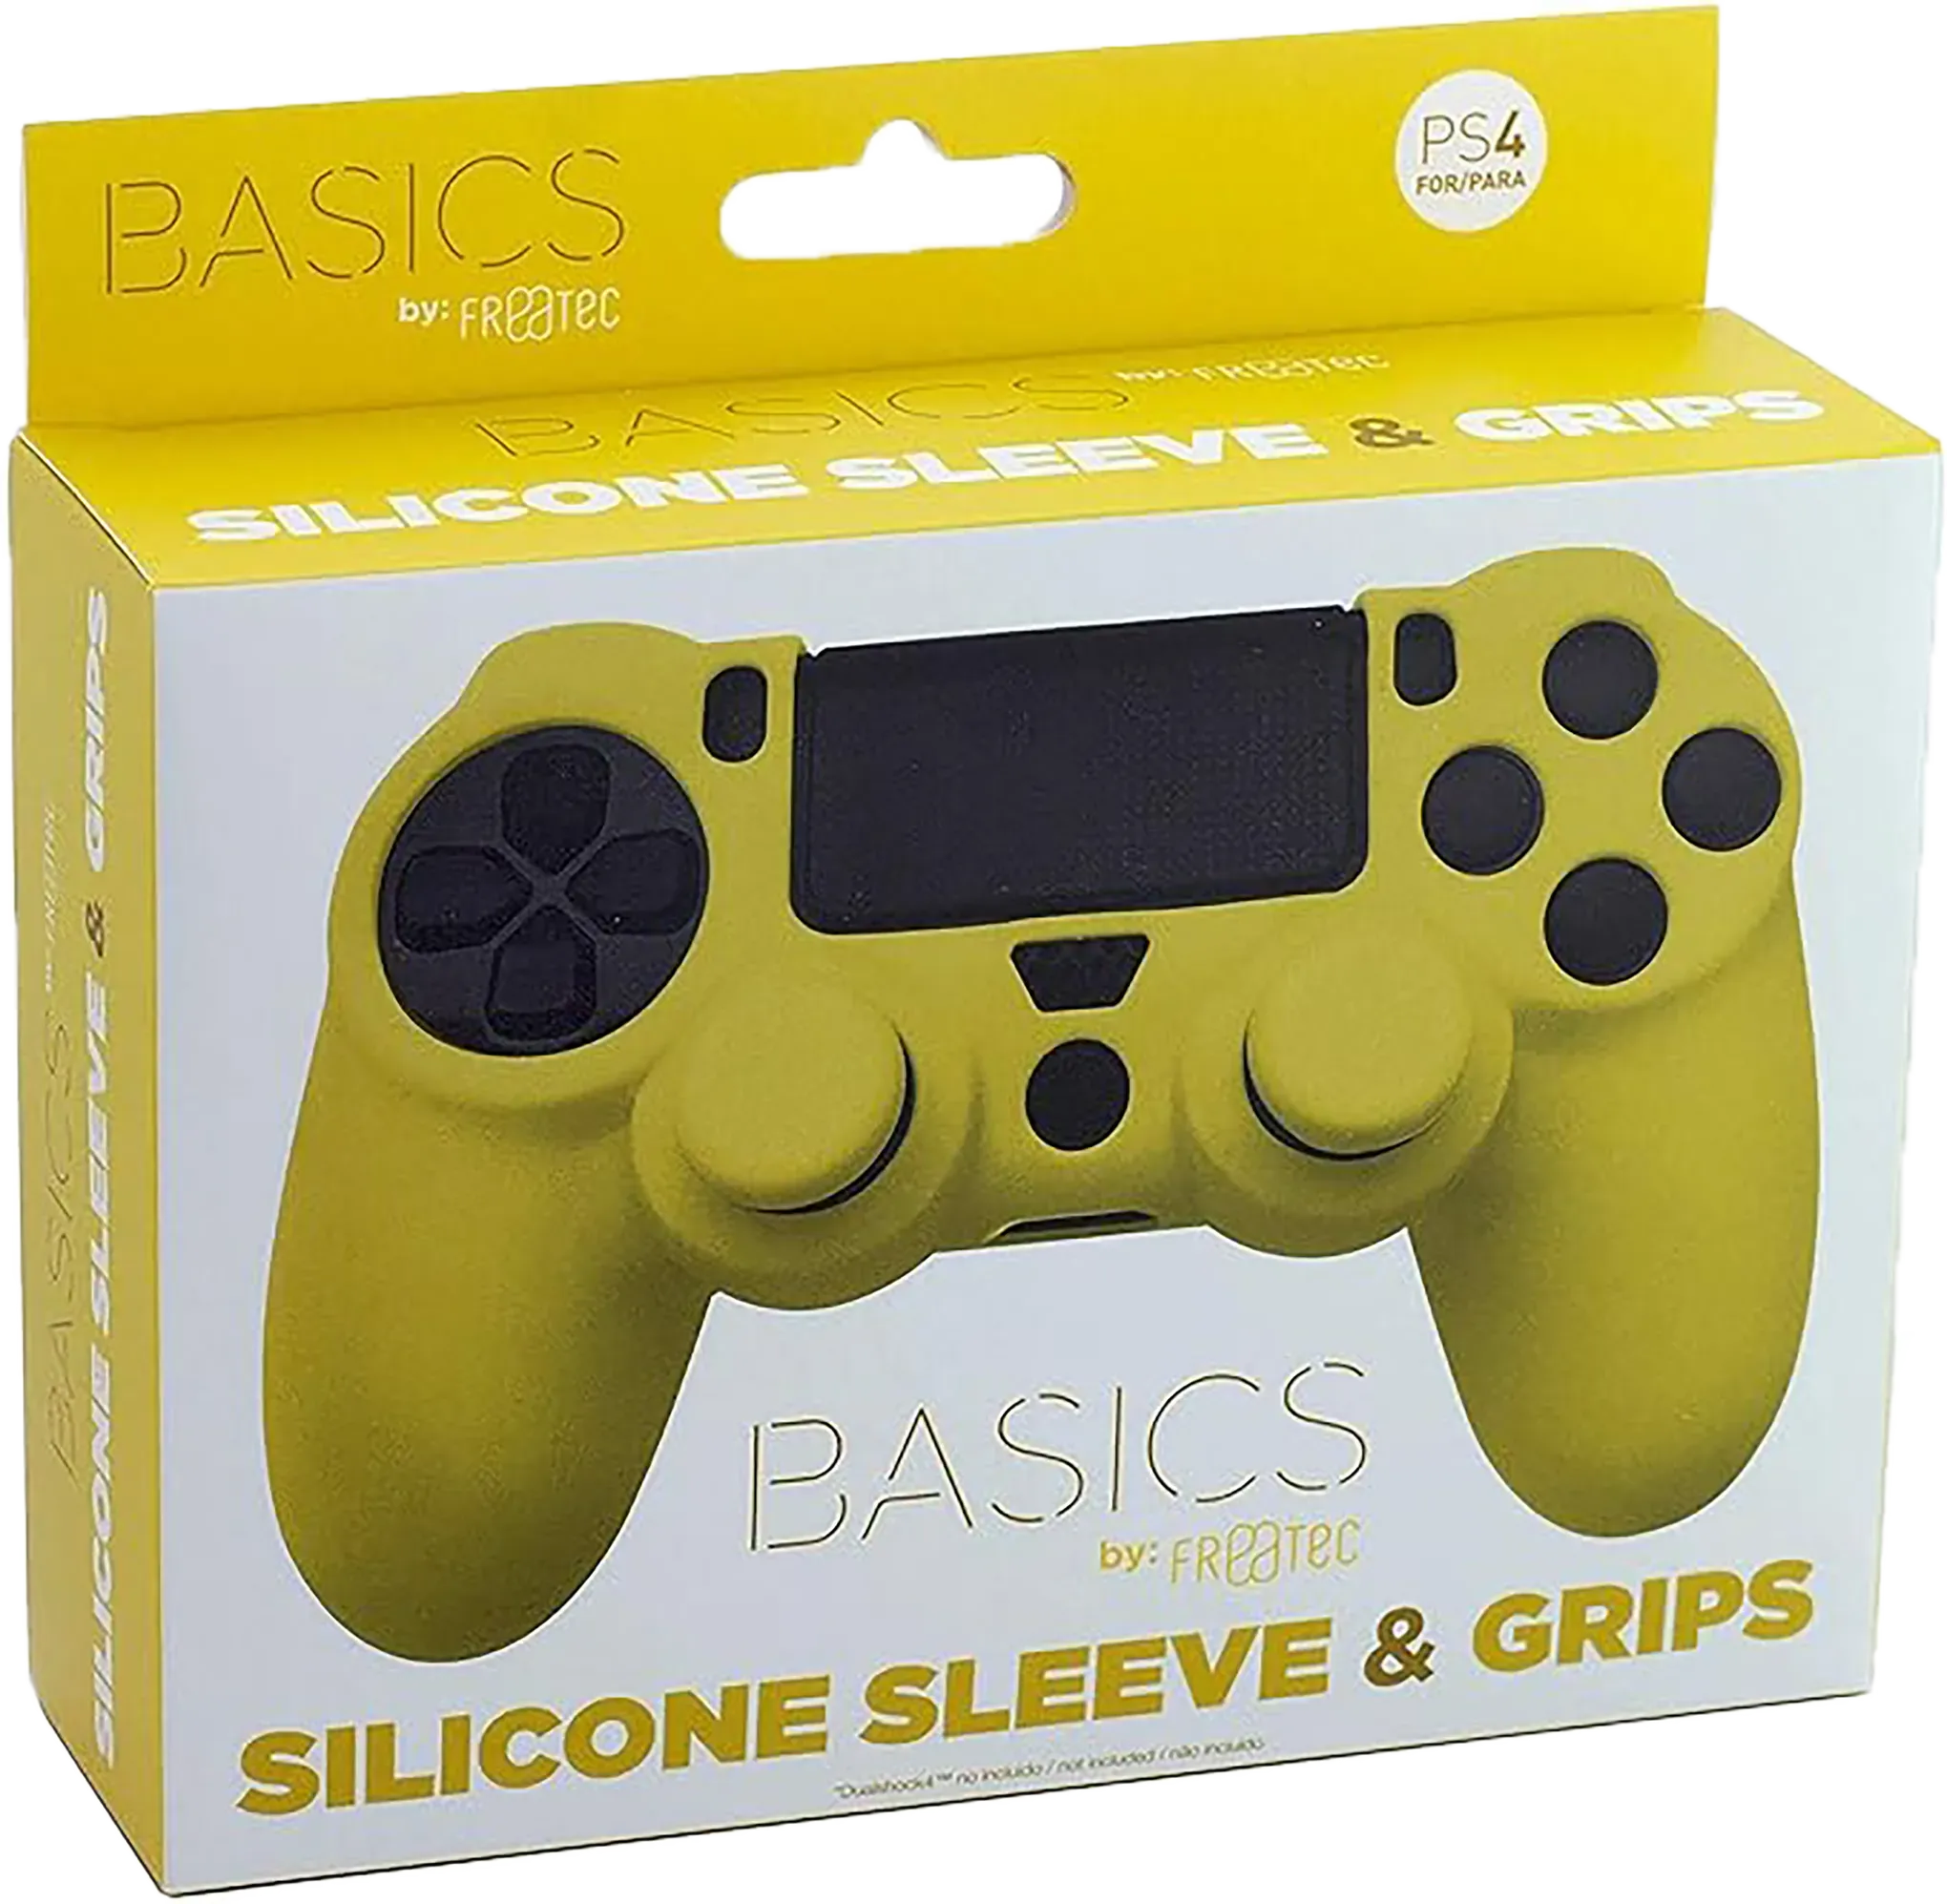 Blade Fr-Tec Full Body Silicone Skin + Grips (Yellow) PS4 - Europe Import New